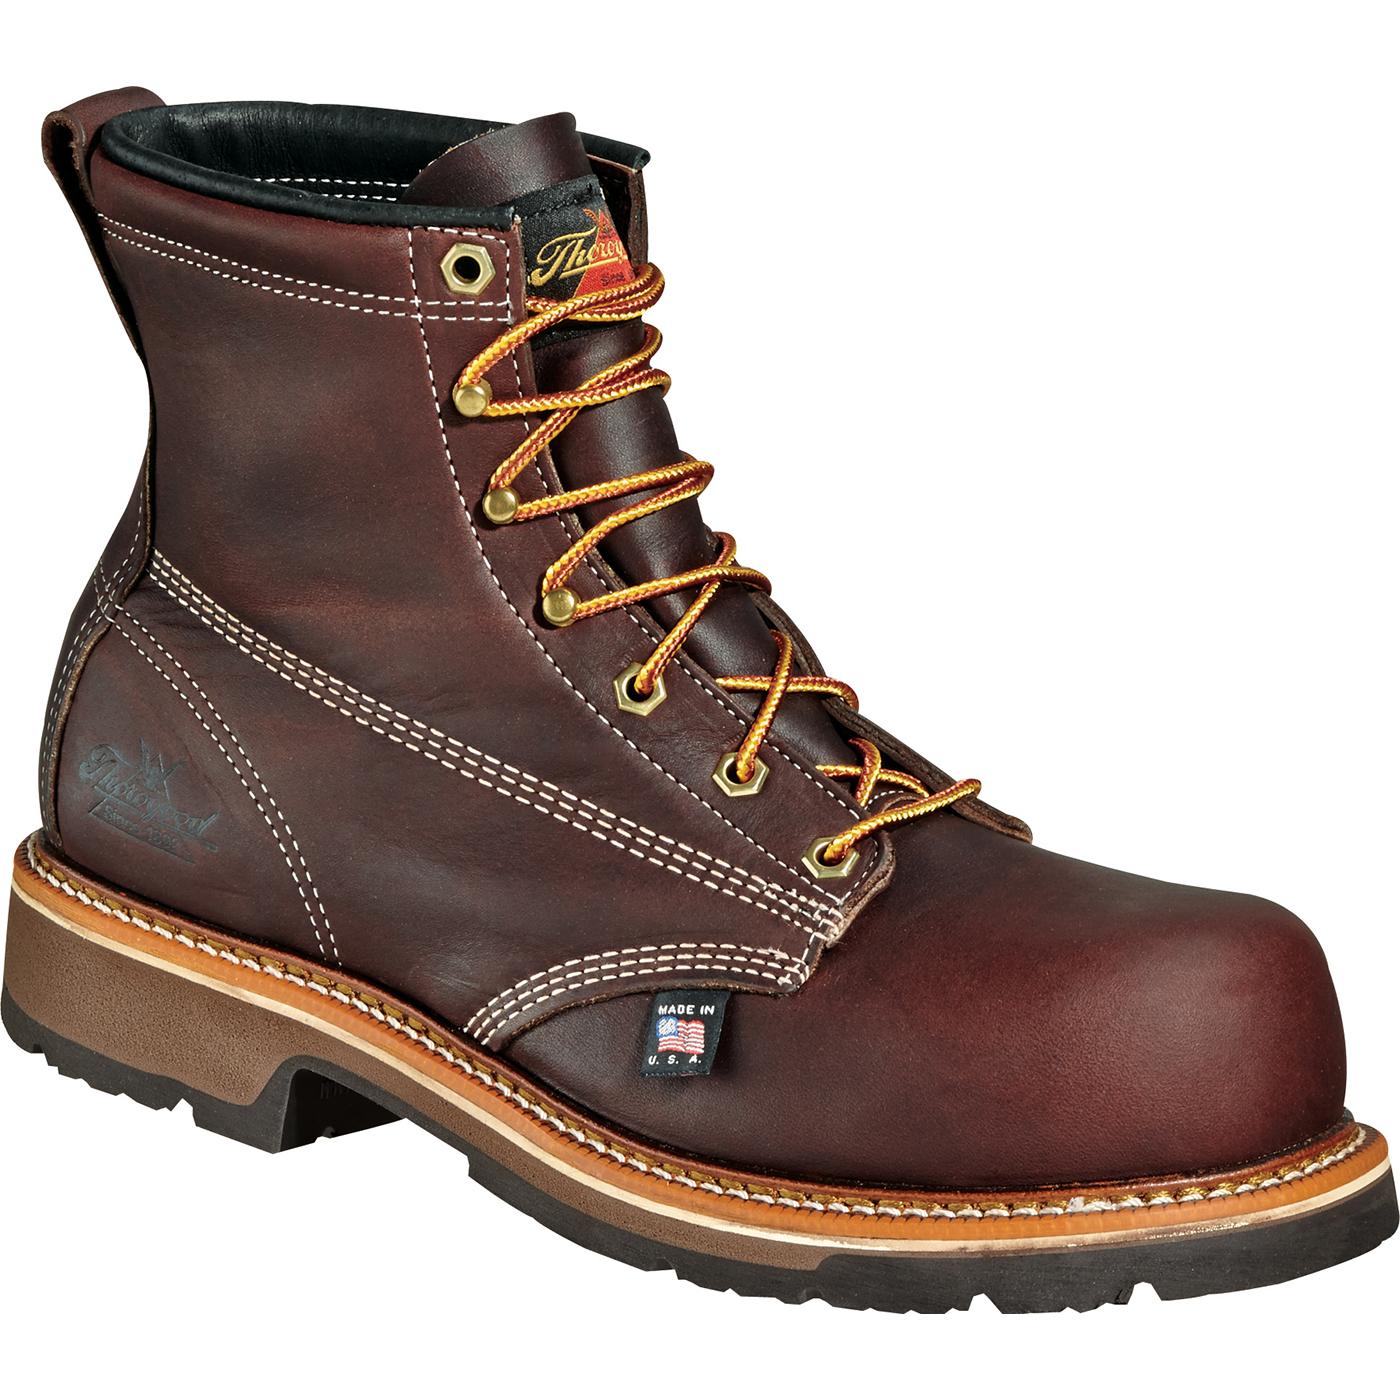 Made In USA Composite Toe Work Boots, Thorogood Emperor